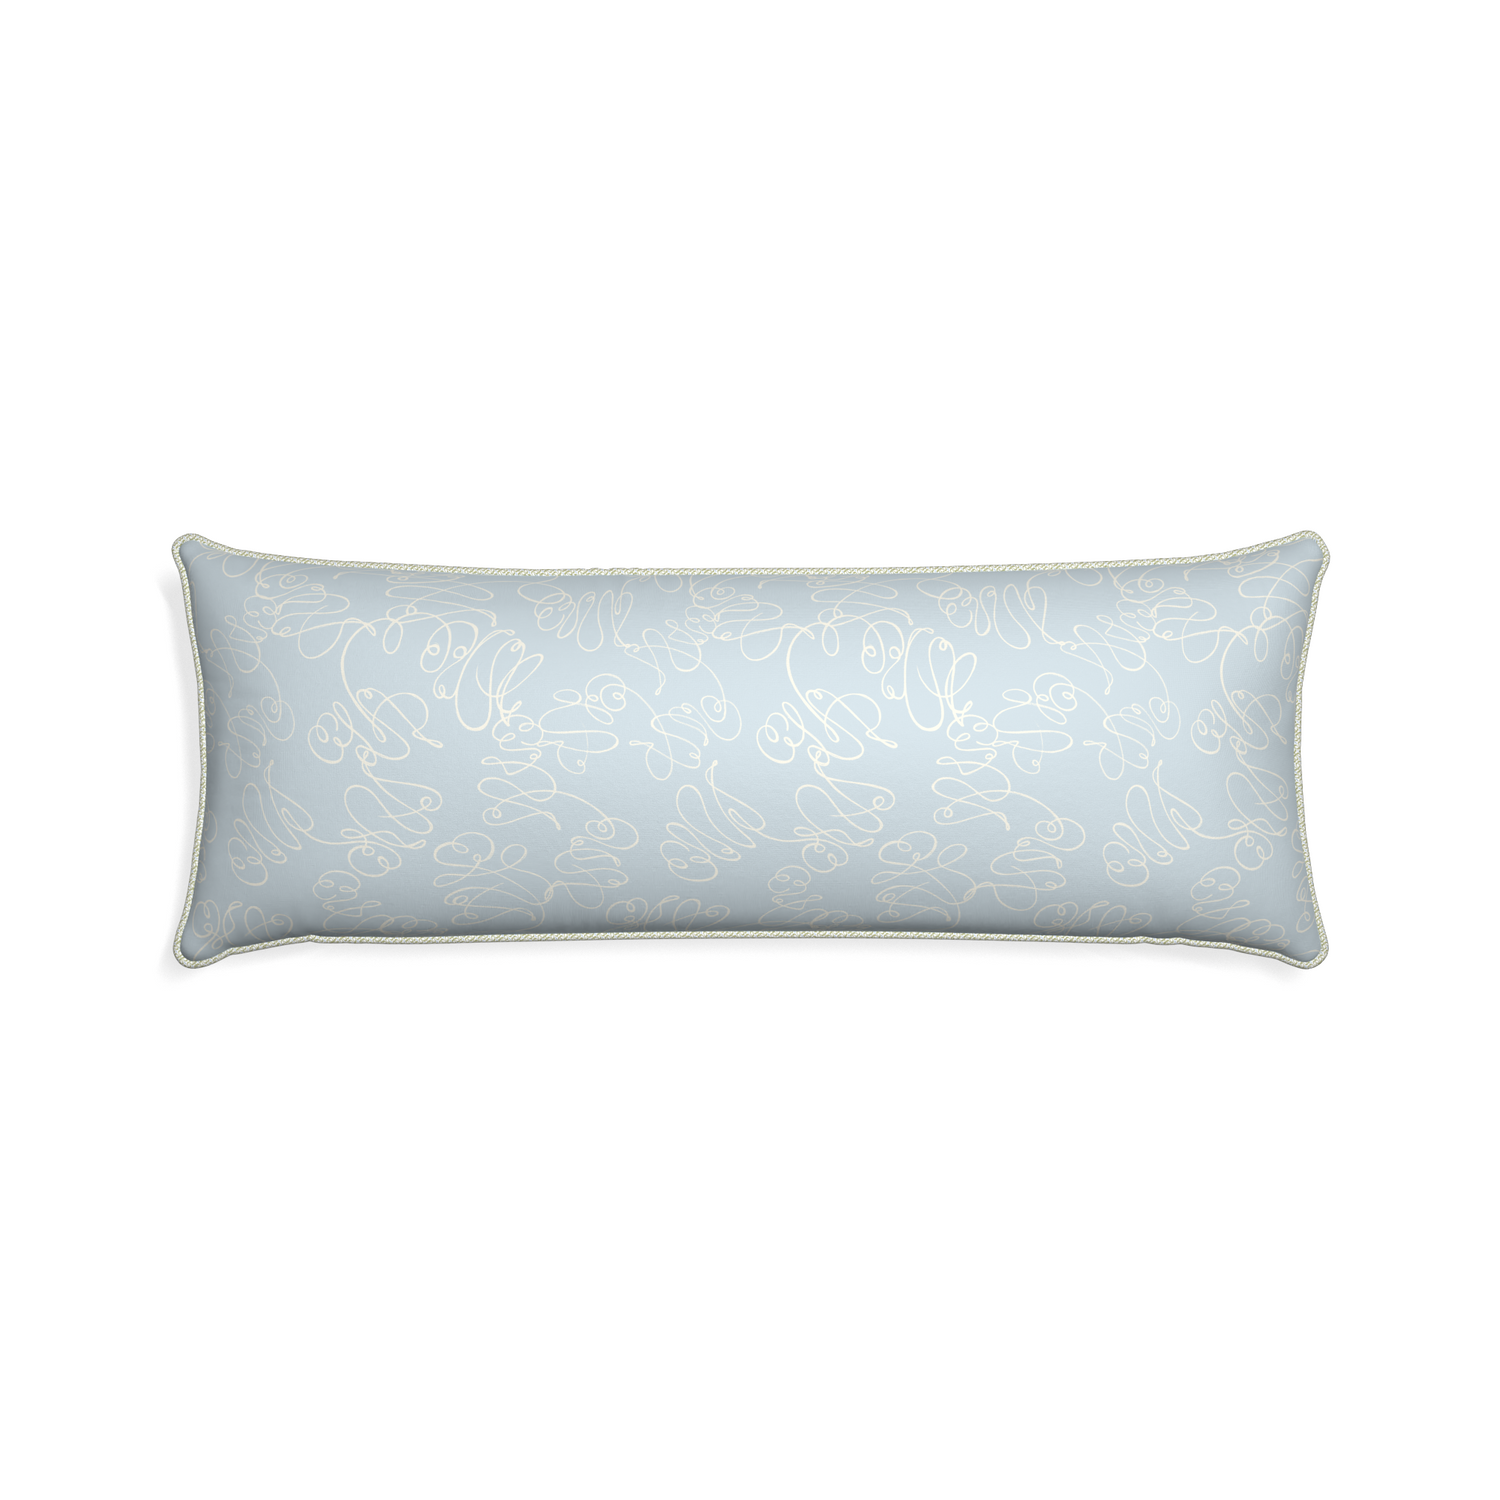 Xl-lumbar mirabella custom pillow with l piping on white background